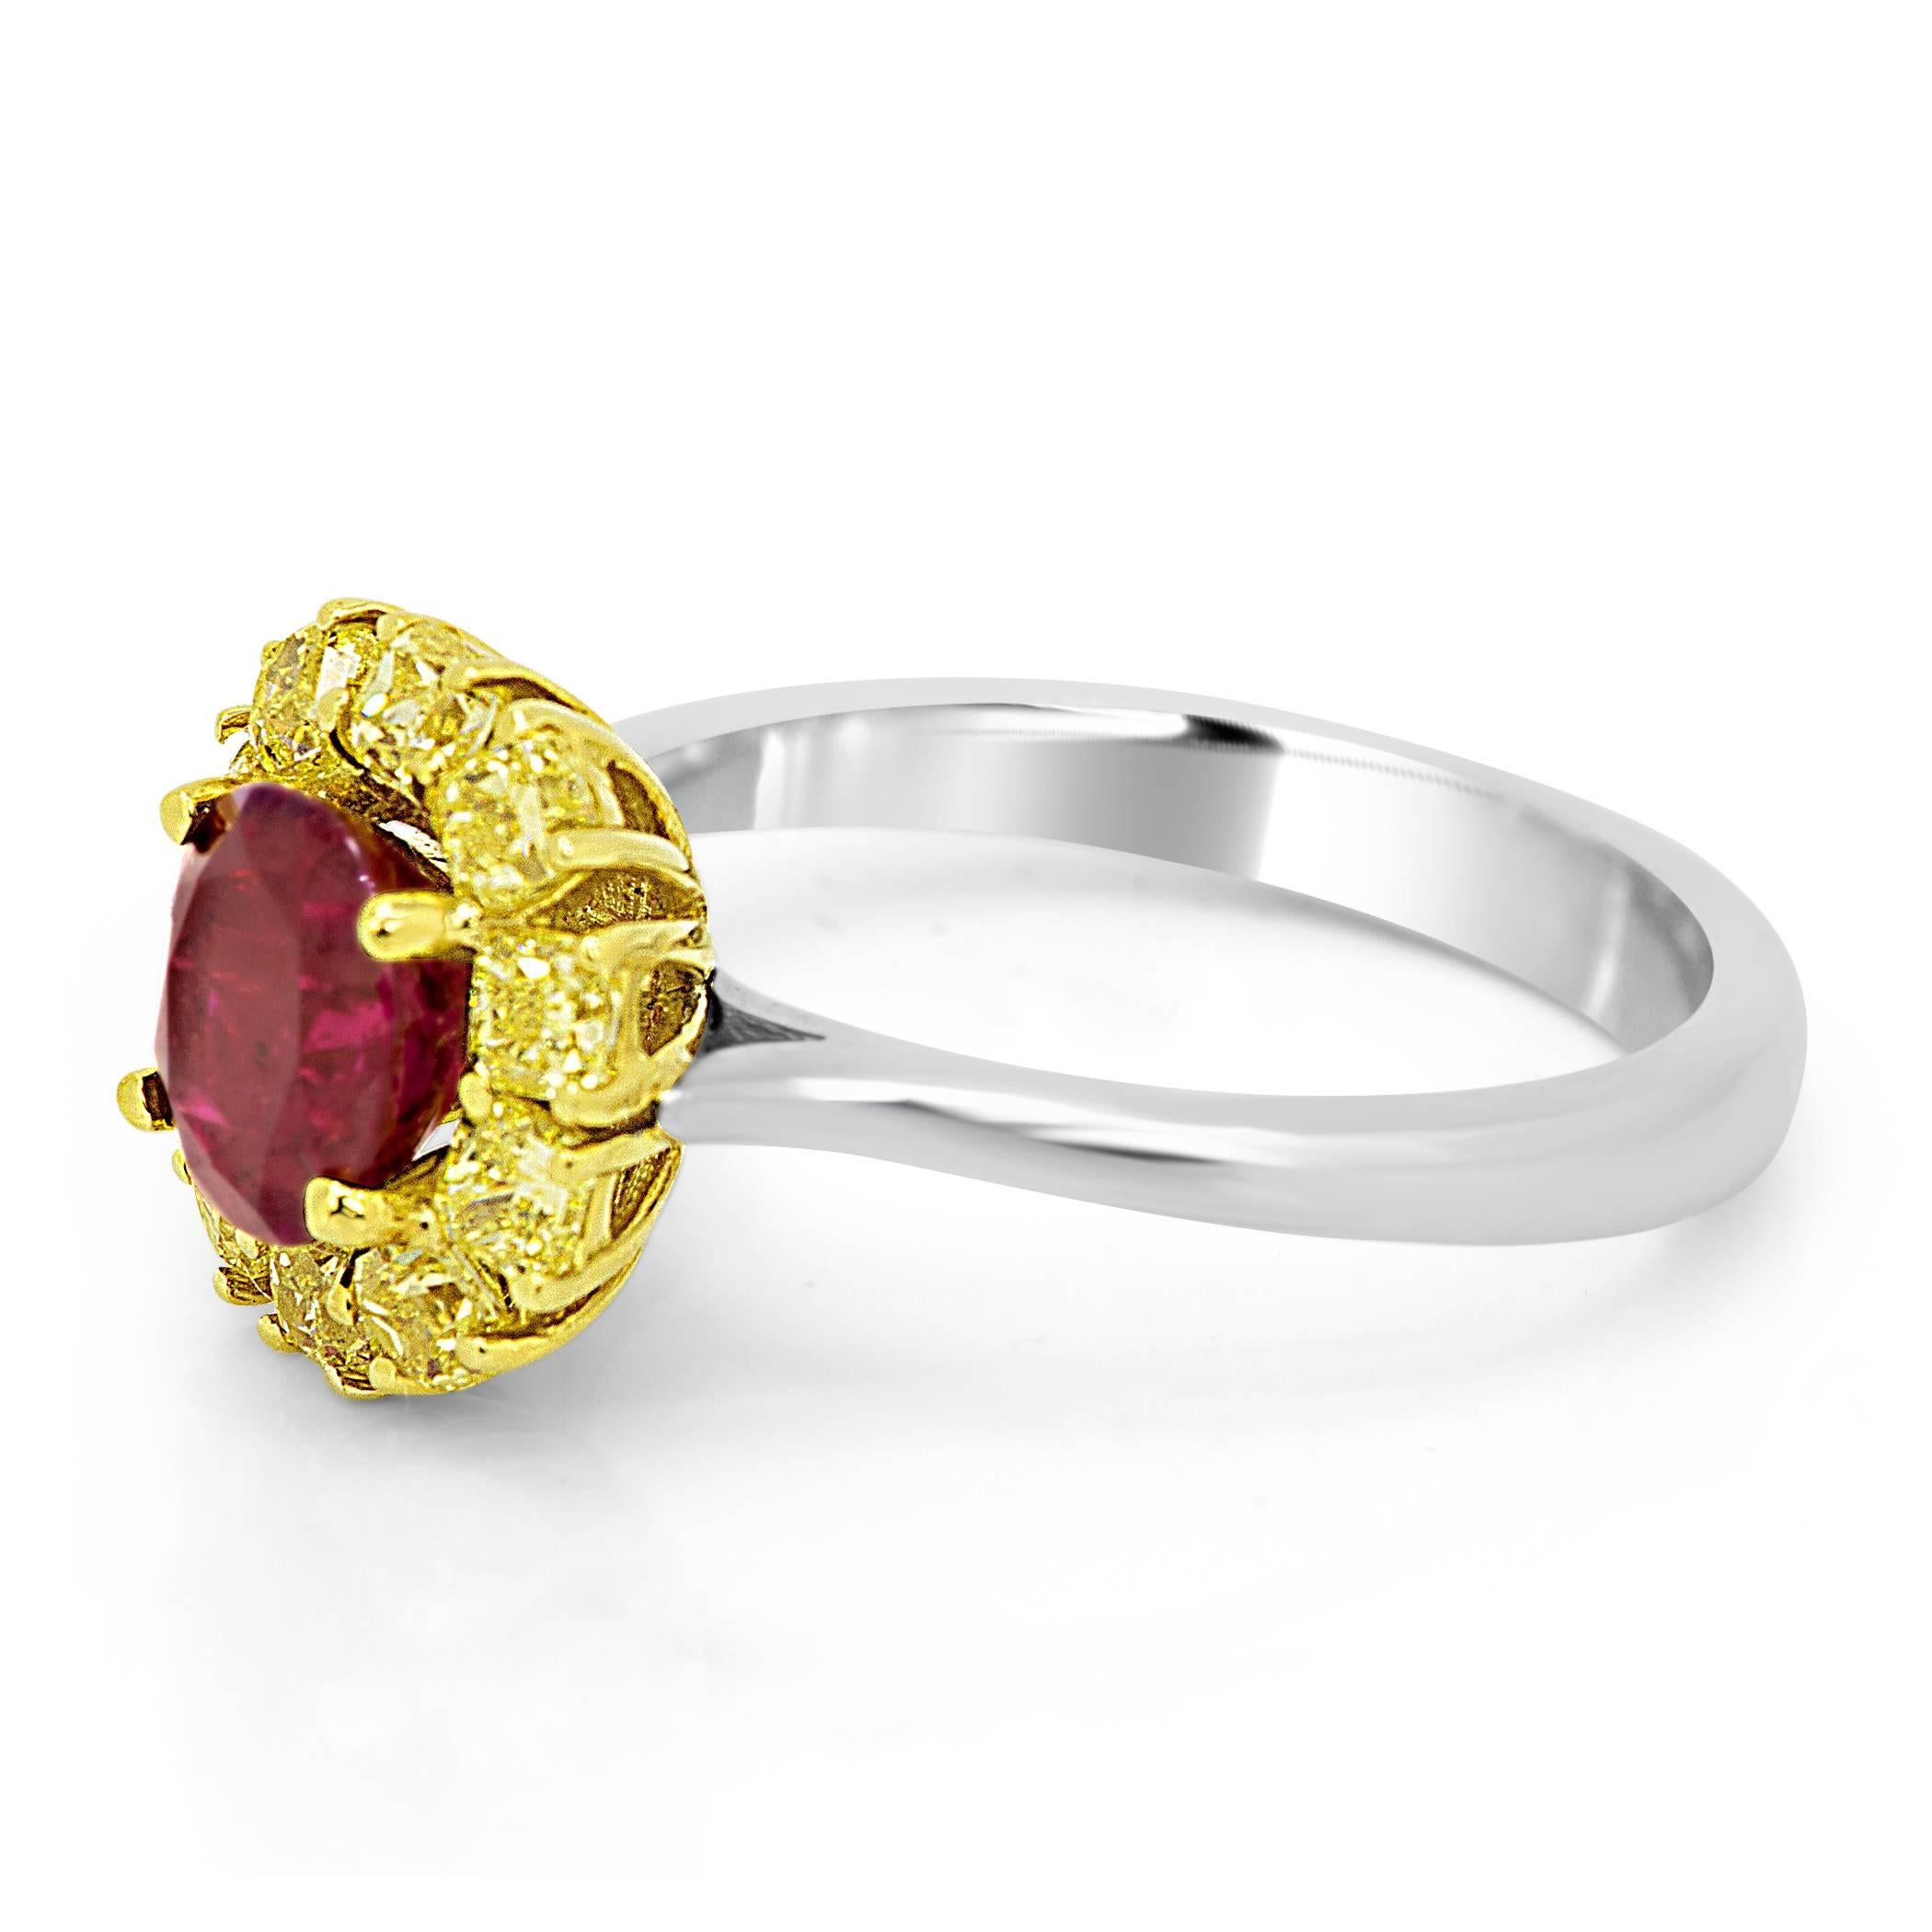 Stunning GIA Certified 1.60 Carat No Heat ruby surrounded by 10 Natural Fancy yellow Diamonds 1.00 Carat in 18K Yellow and White Gold Bridal Fashion Cocktail ring.

Style available in different price ranges. Prices are based on your selection of